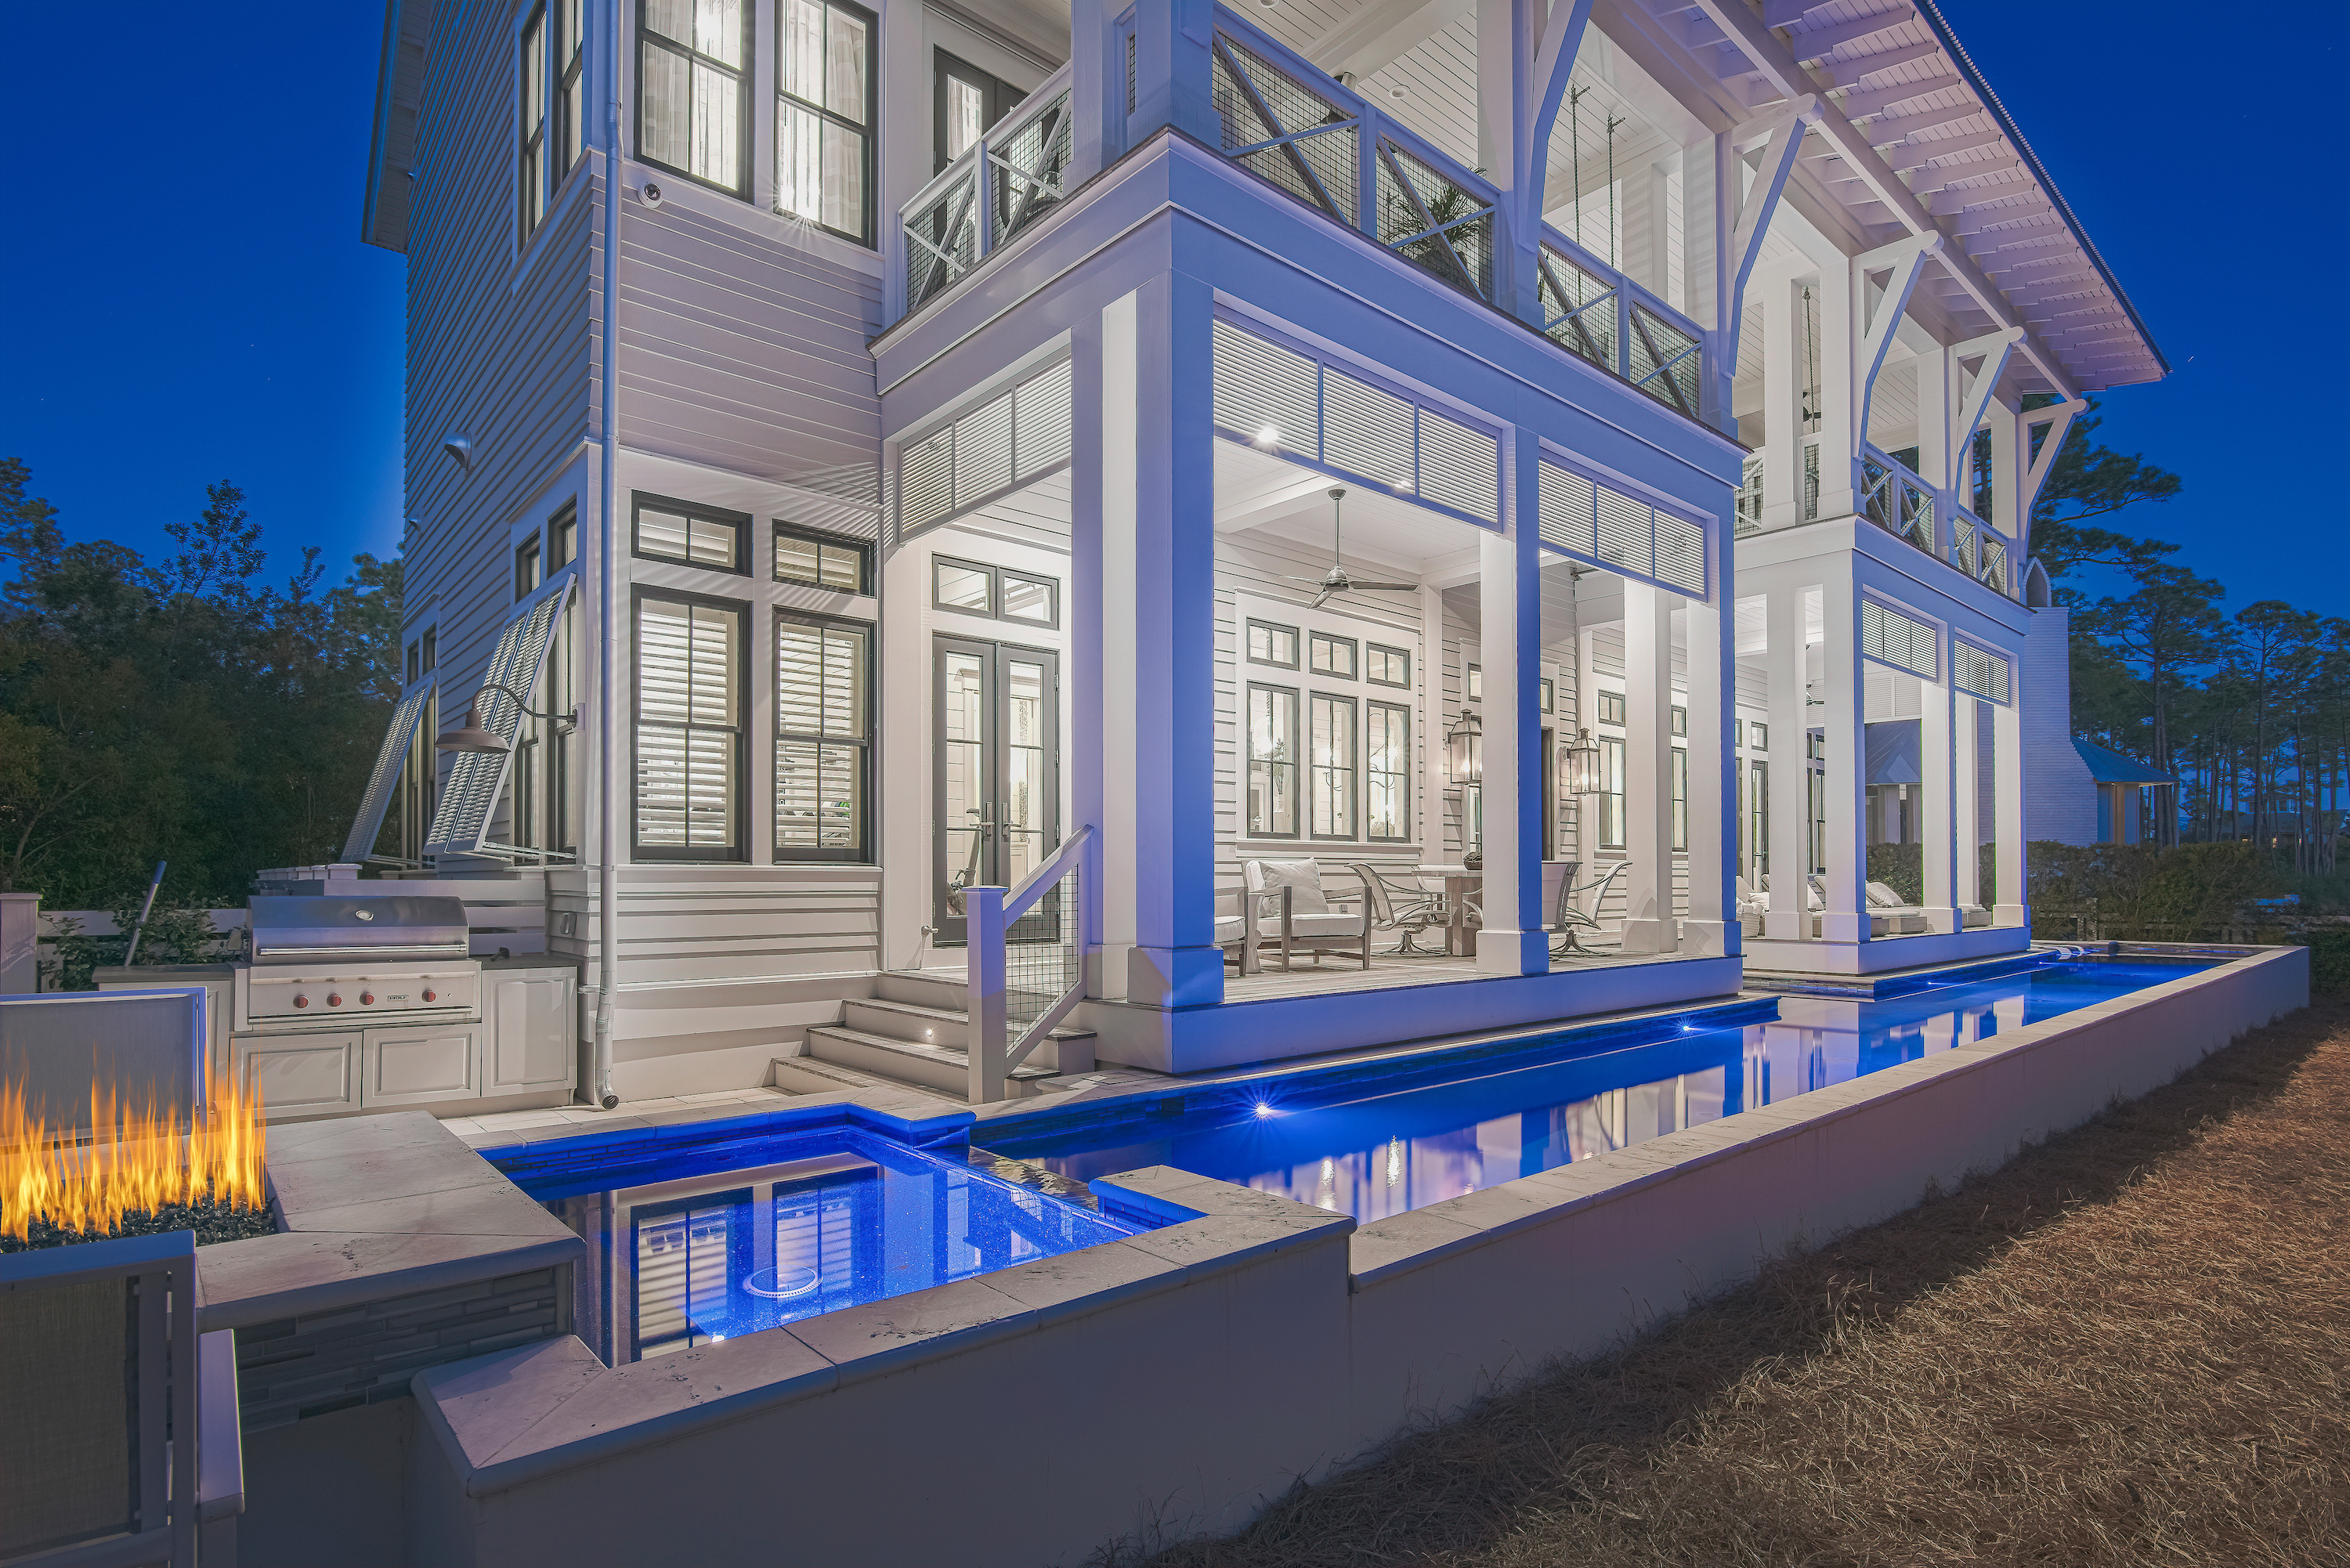 A evening view of a fully lit luxury Watercolor home featuring it's private pool with colored lights